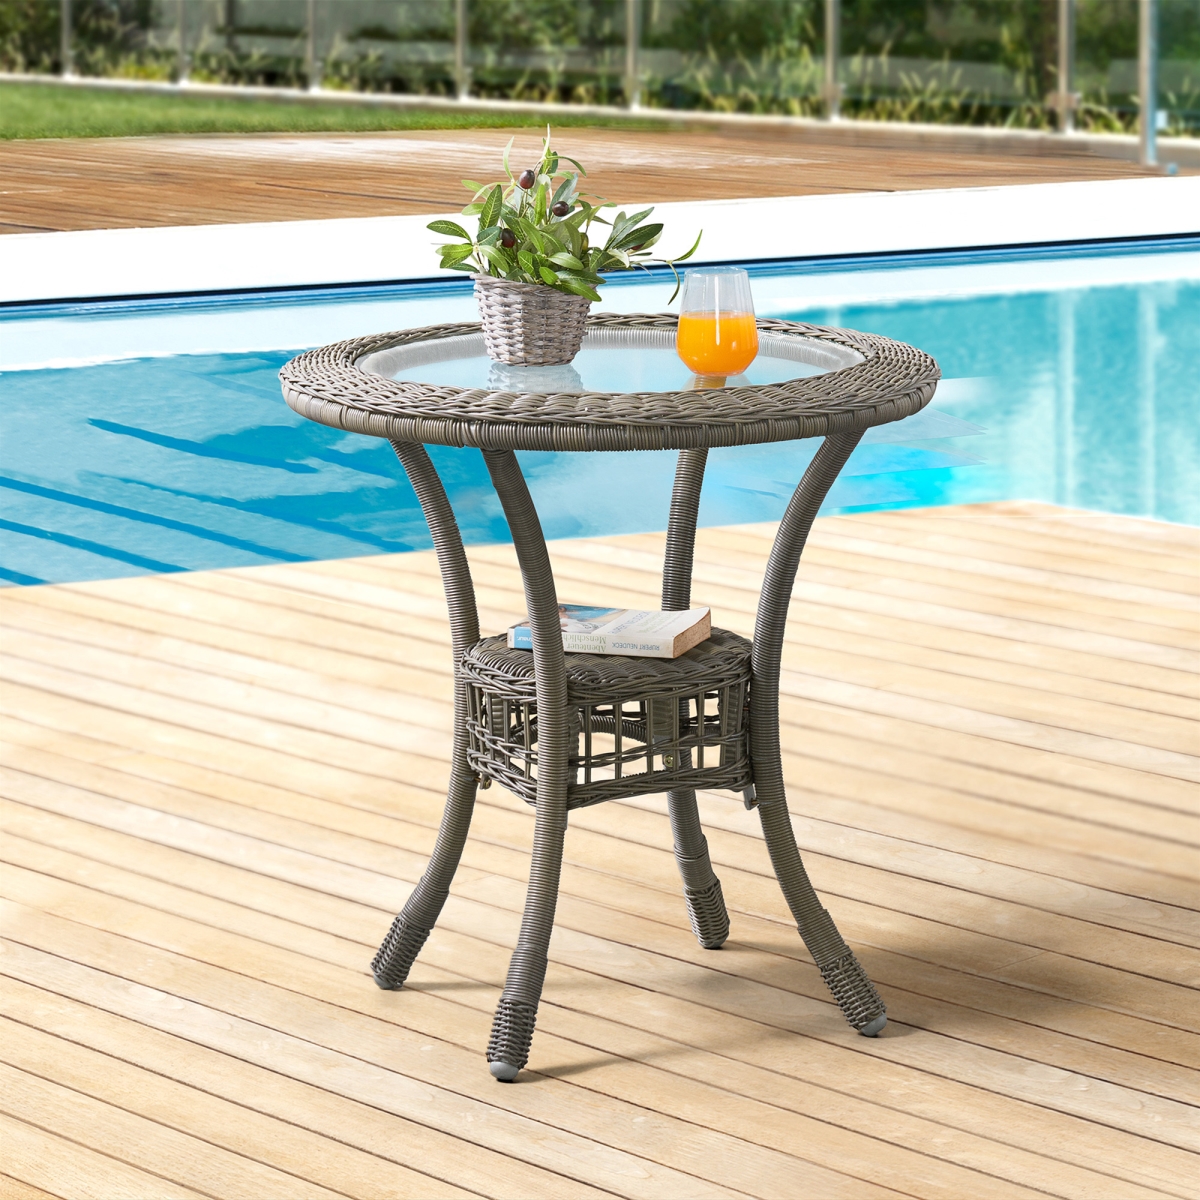 Picture of Alaterre AWWM01MM 30 in. Carolina Diameter All-Weather Wicker Bistro Dining Table with Glass Top